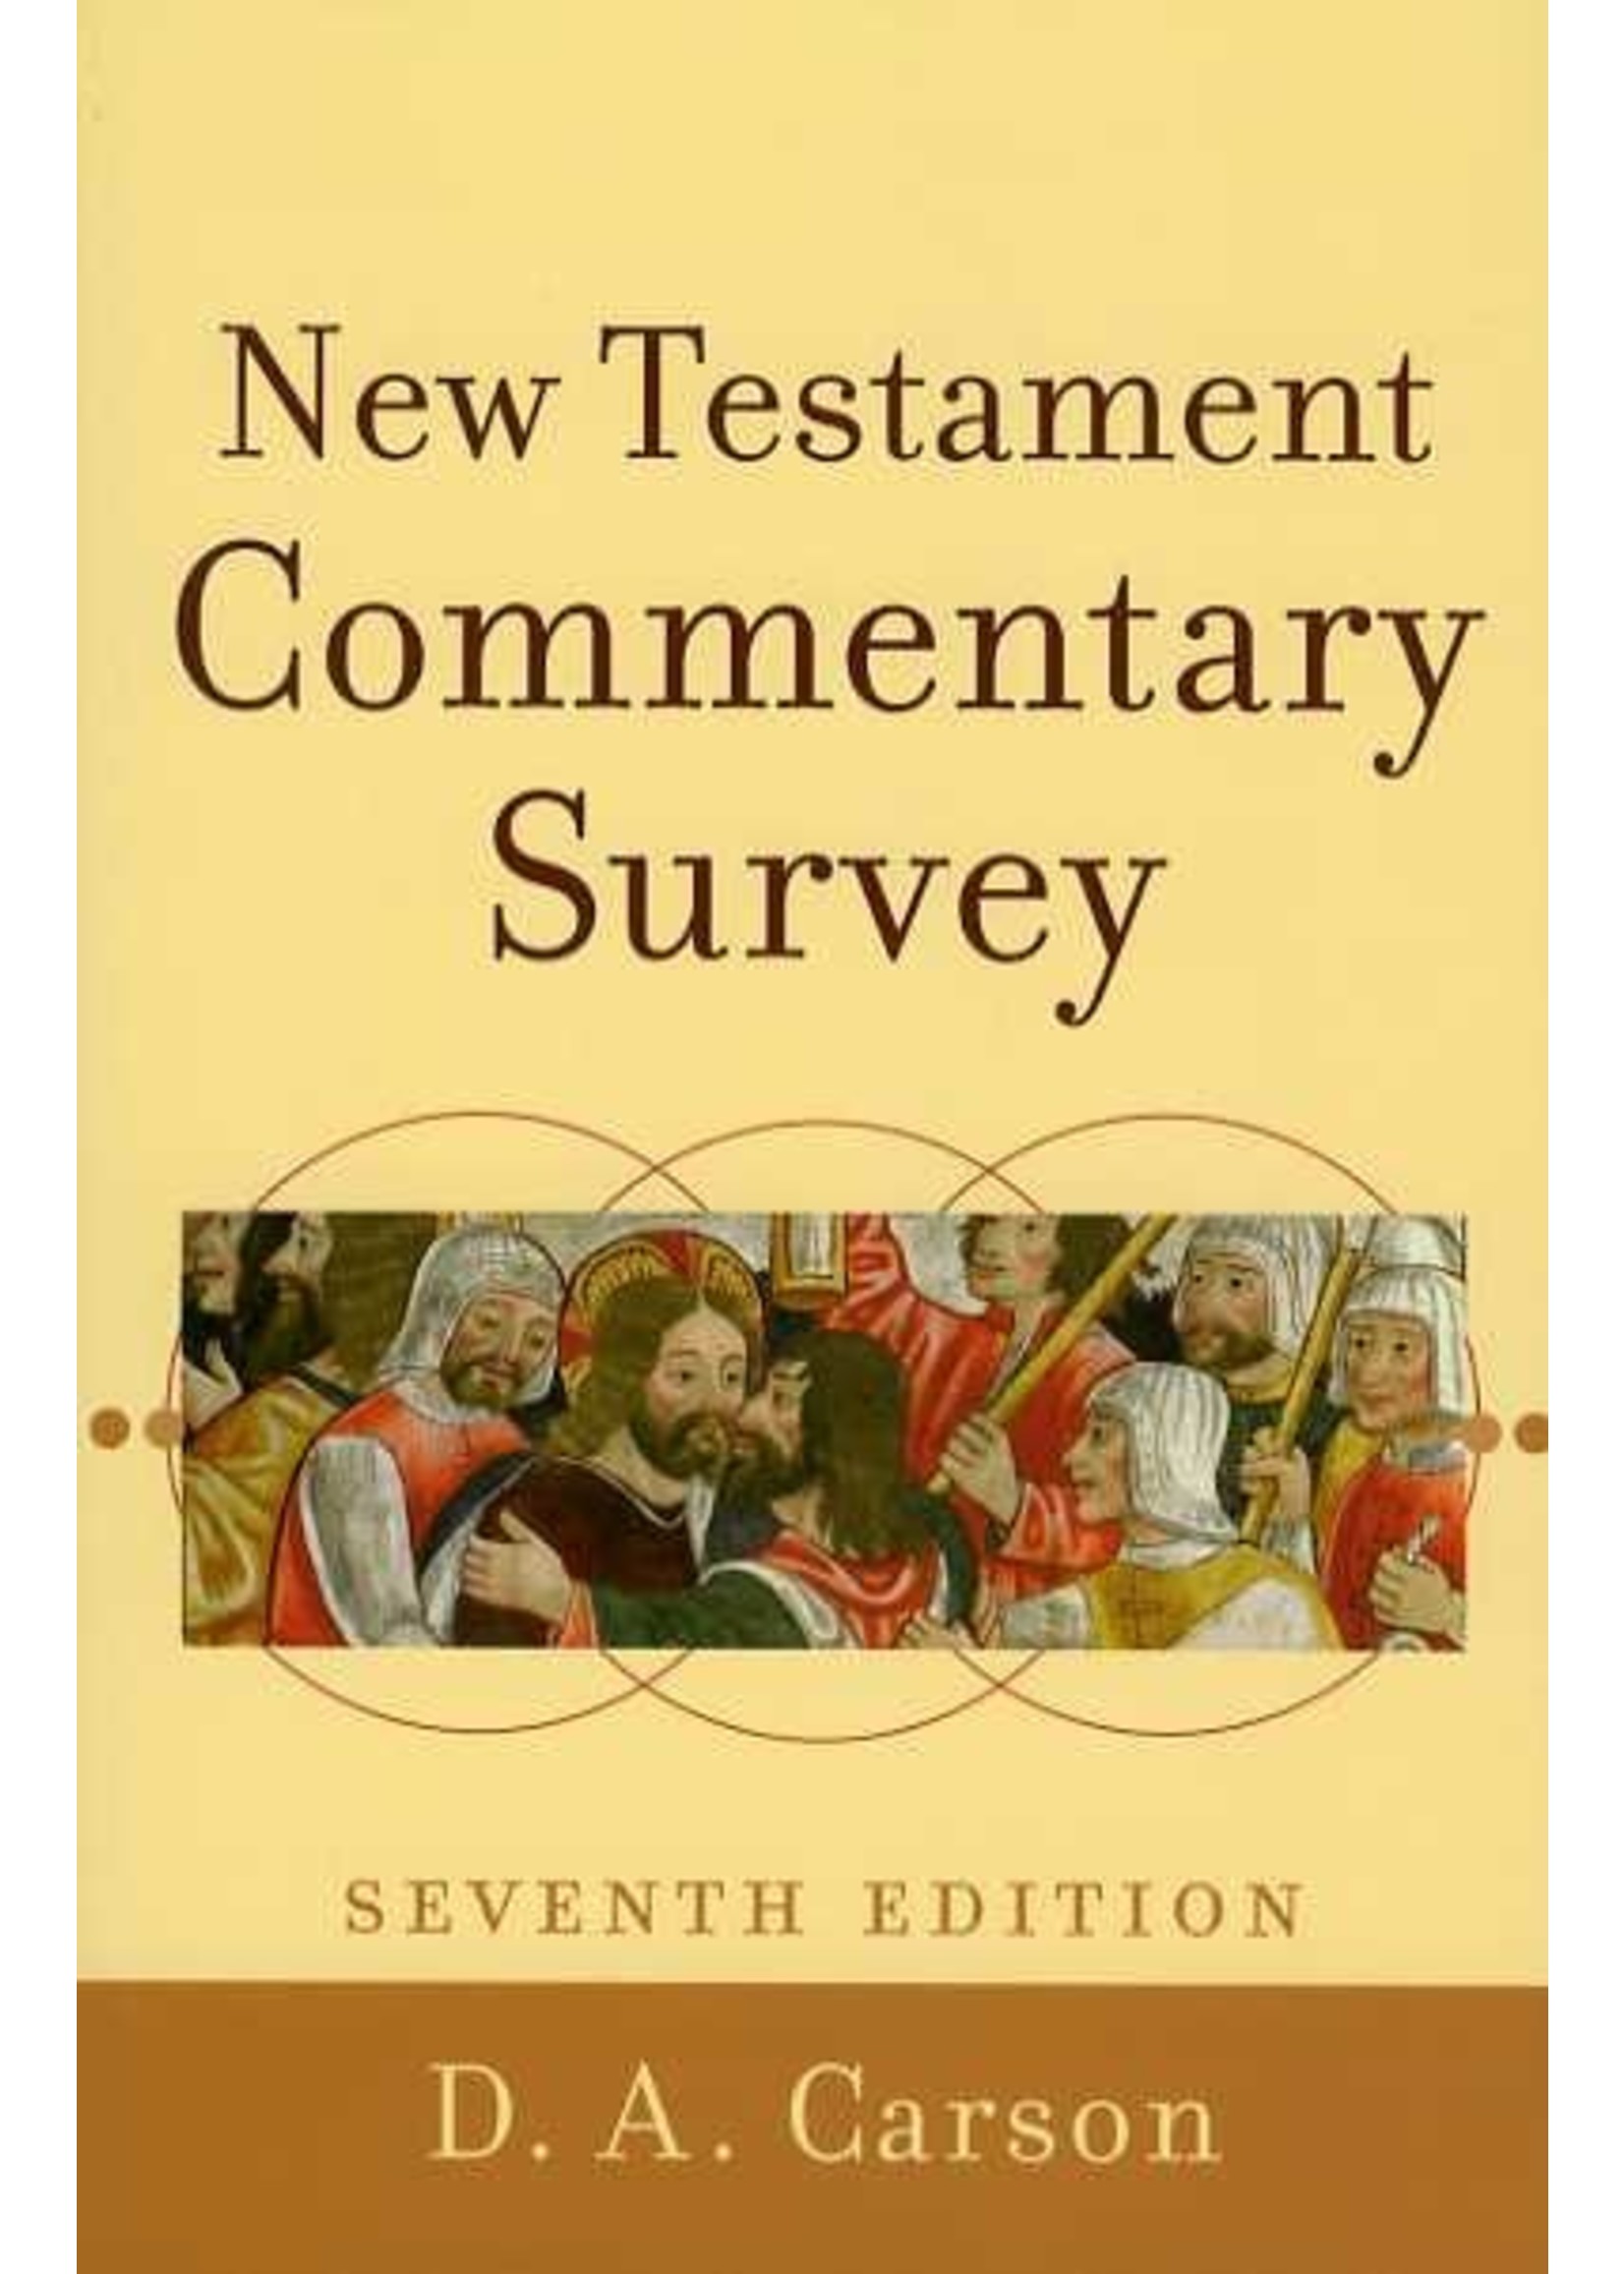 Baker Publishing New Testament Commentary Survey 7th Ed - D. A. Carson